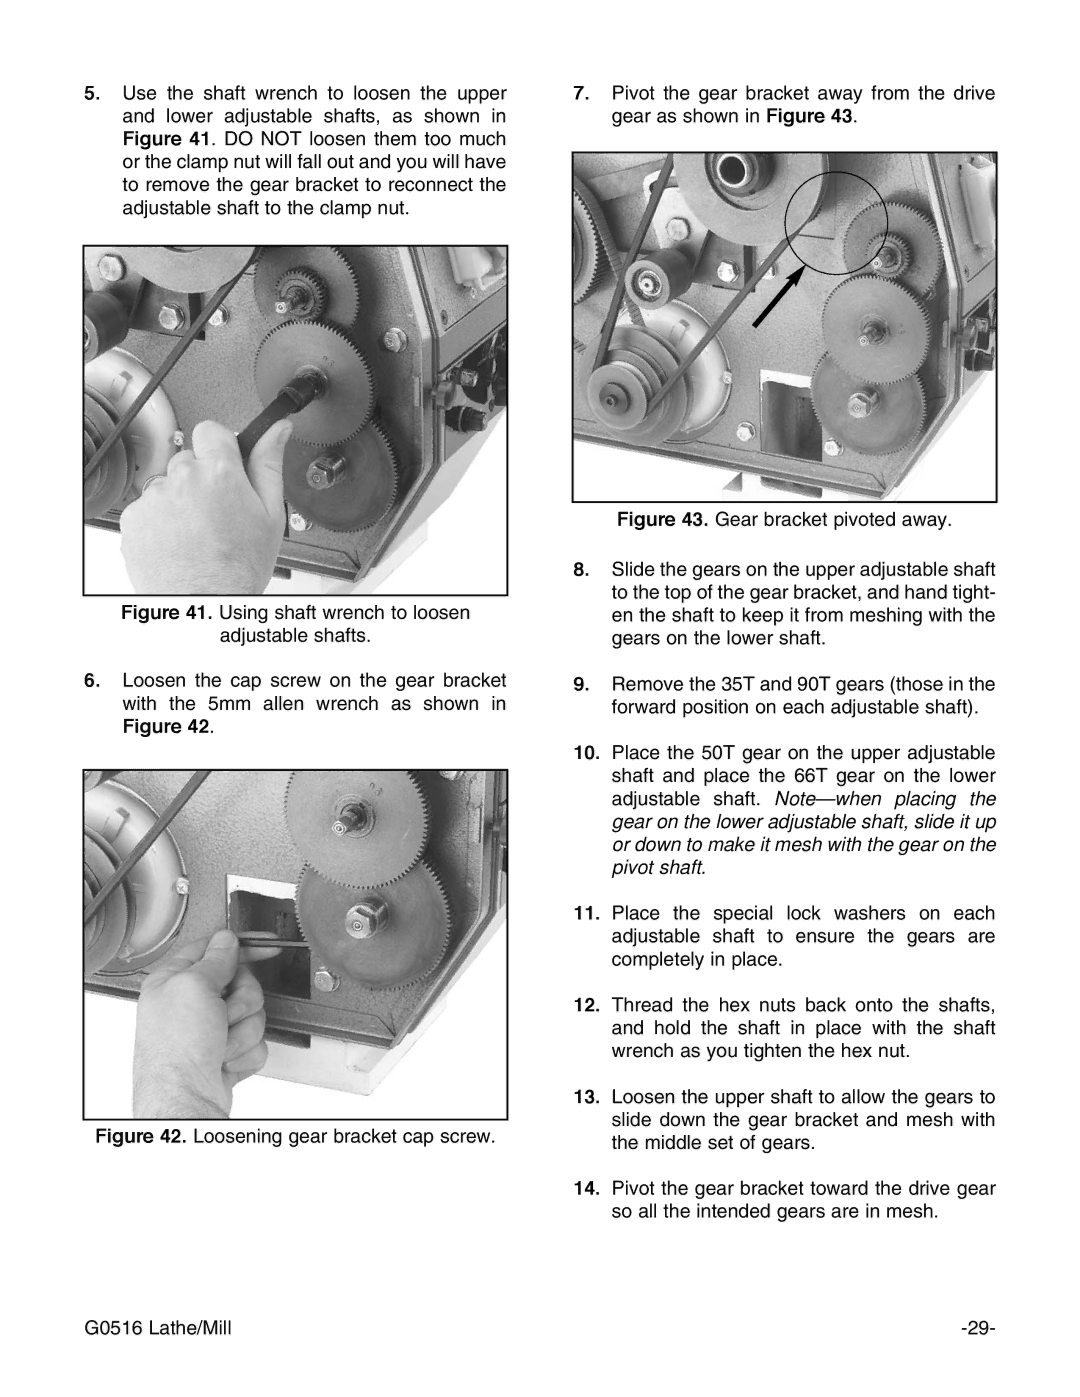 Grizzly G0516 instruction manual 